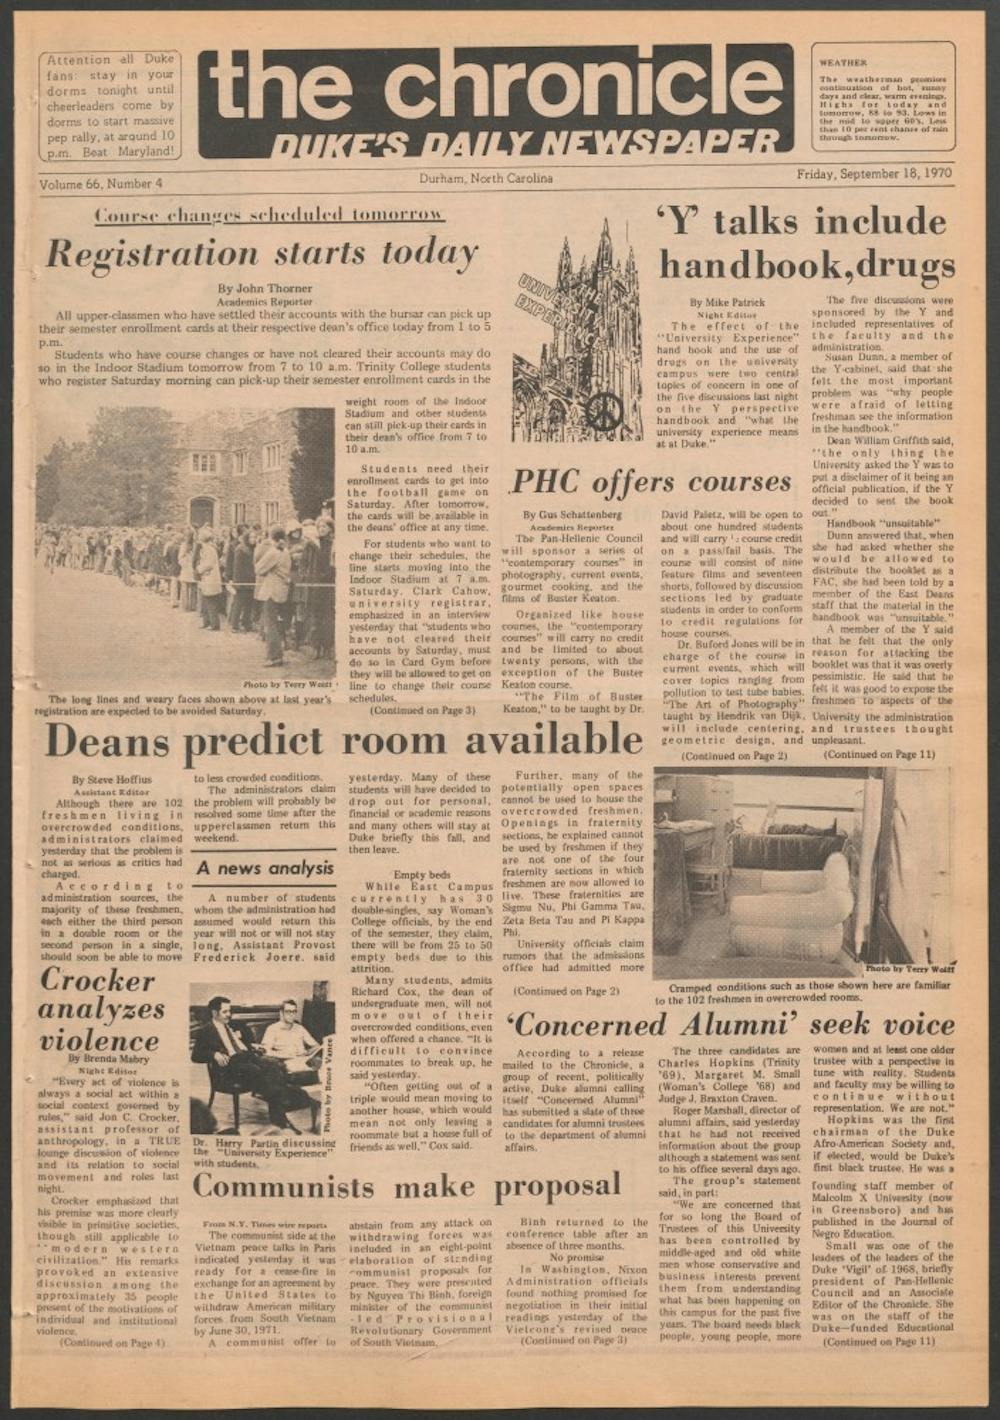 A small note in the top right corner of the Sept. 18, 1970, issue of The Chronicle provided interesting details about an upcoming pep rally.